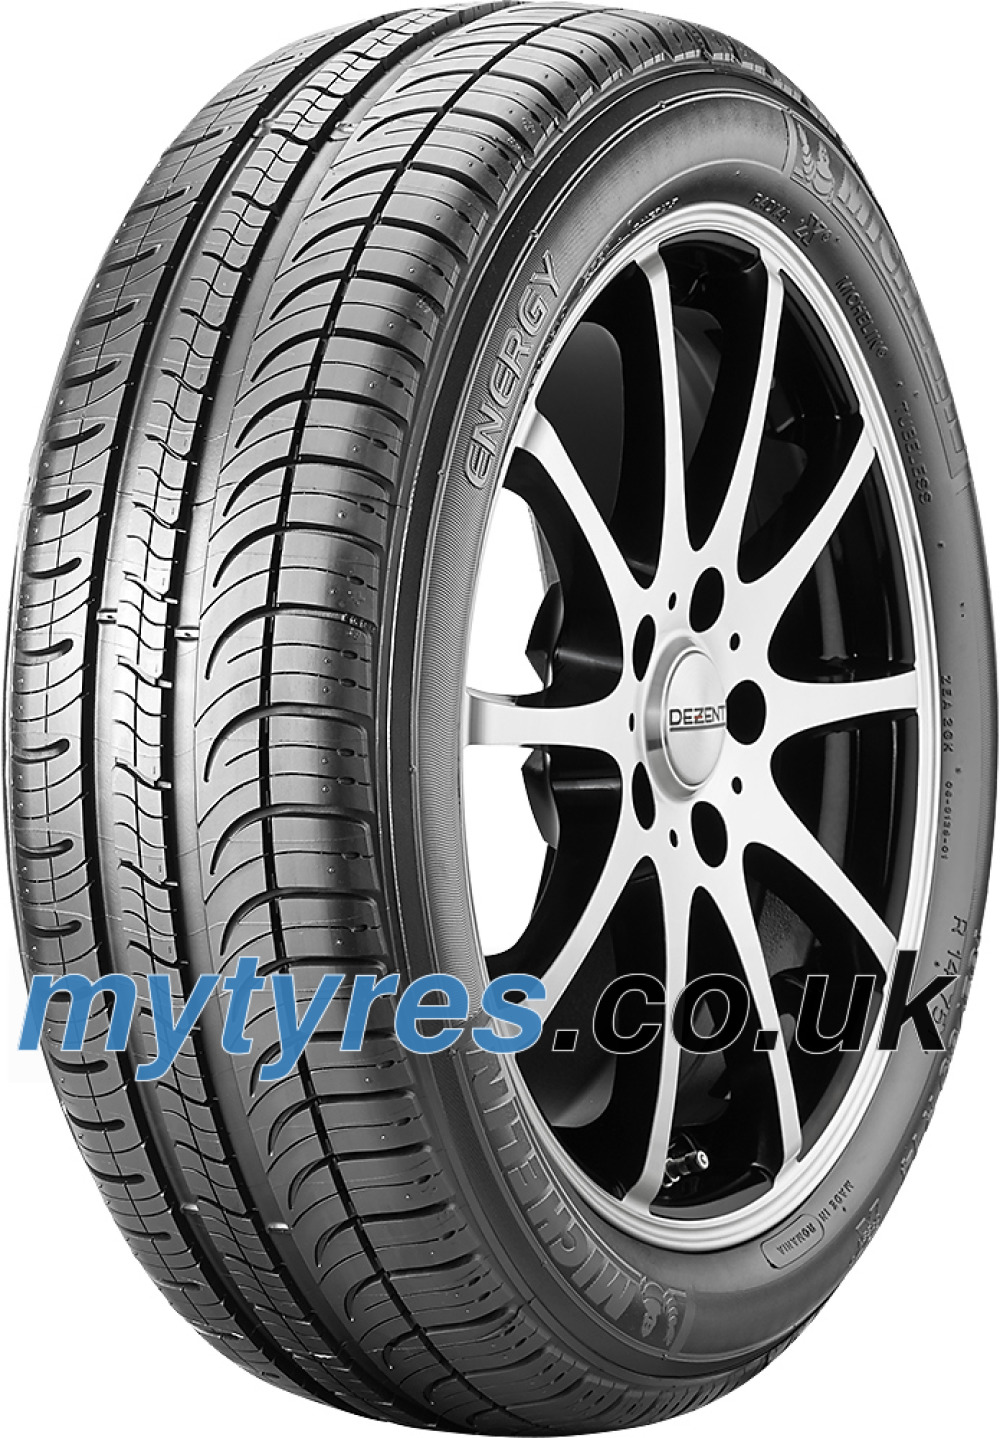 Thriller Compose Investigation Michelin Energy E3B 1 155/70 R13 75T @ mytyres.co.uk